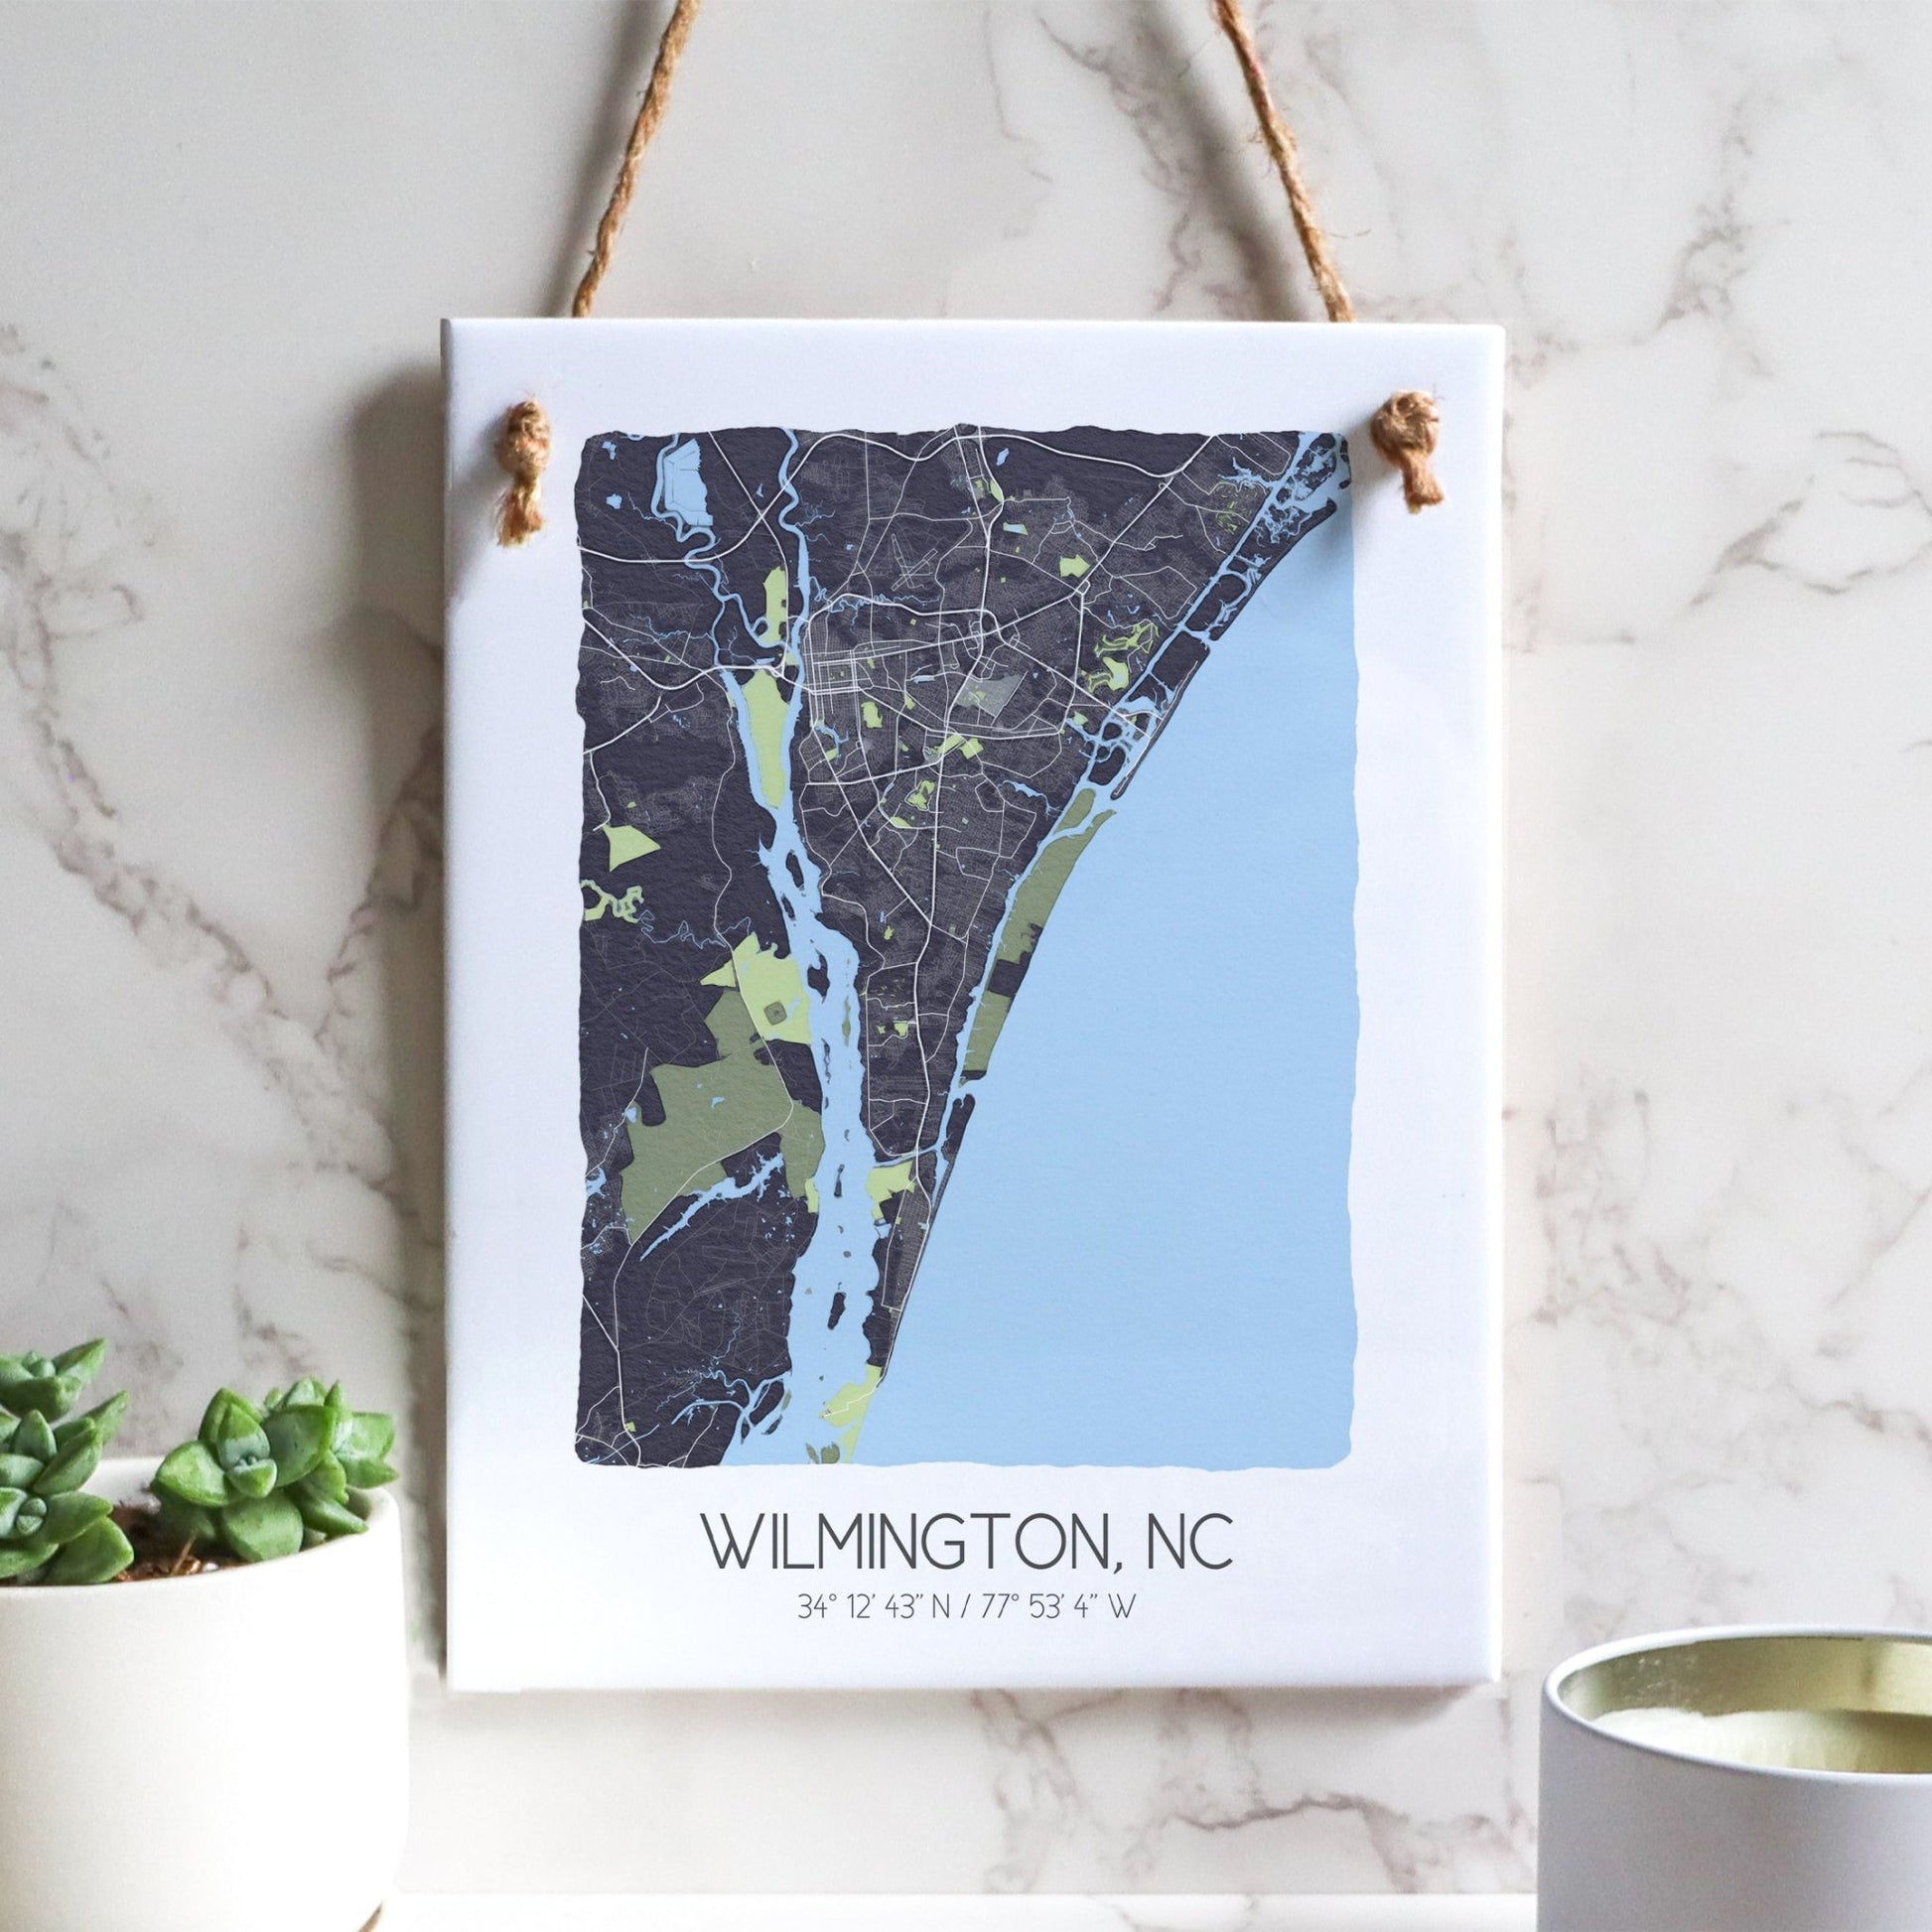 A Wilmington NC city map on a ceramic rectangle tile sign hanging on a wall, in gray